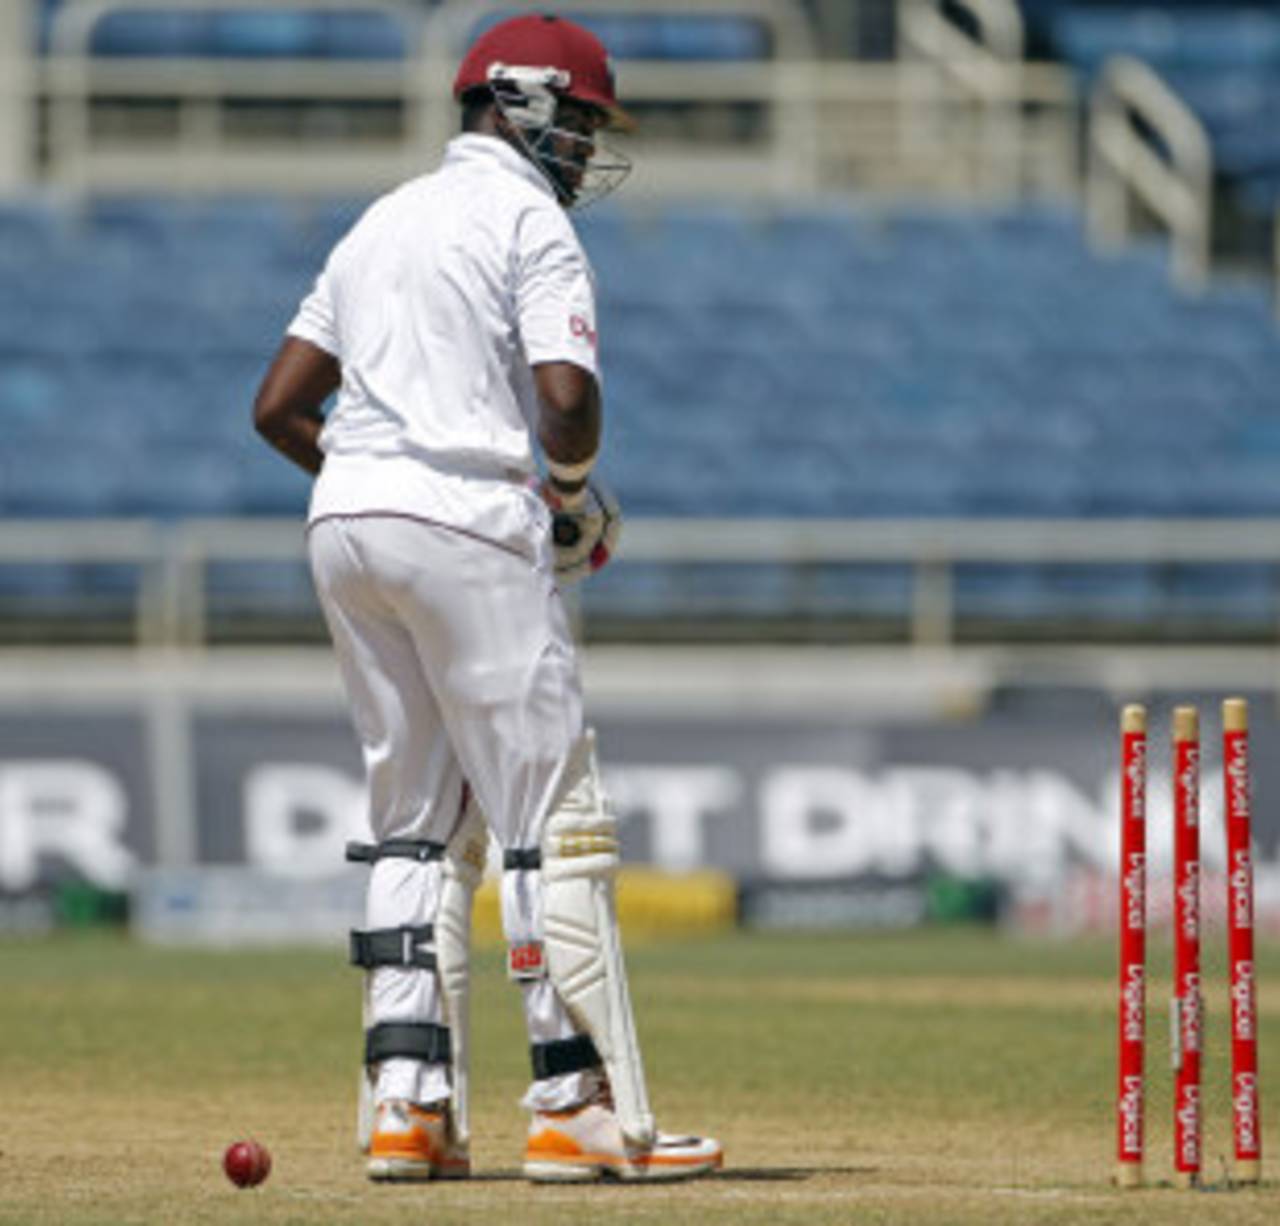 Darren Bravo looks back after being bowled round his legs, West Indies v India, 1st Test, Kingston, 4th day, June 23, 2011